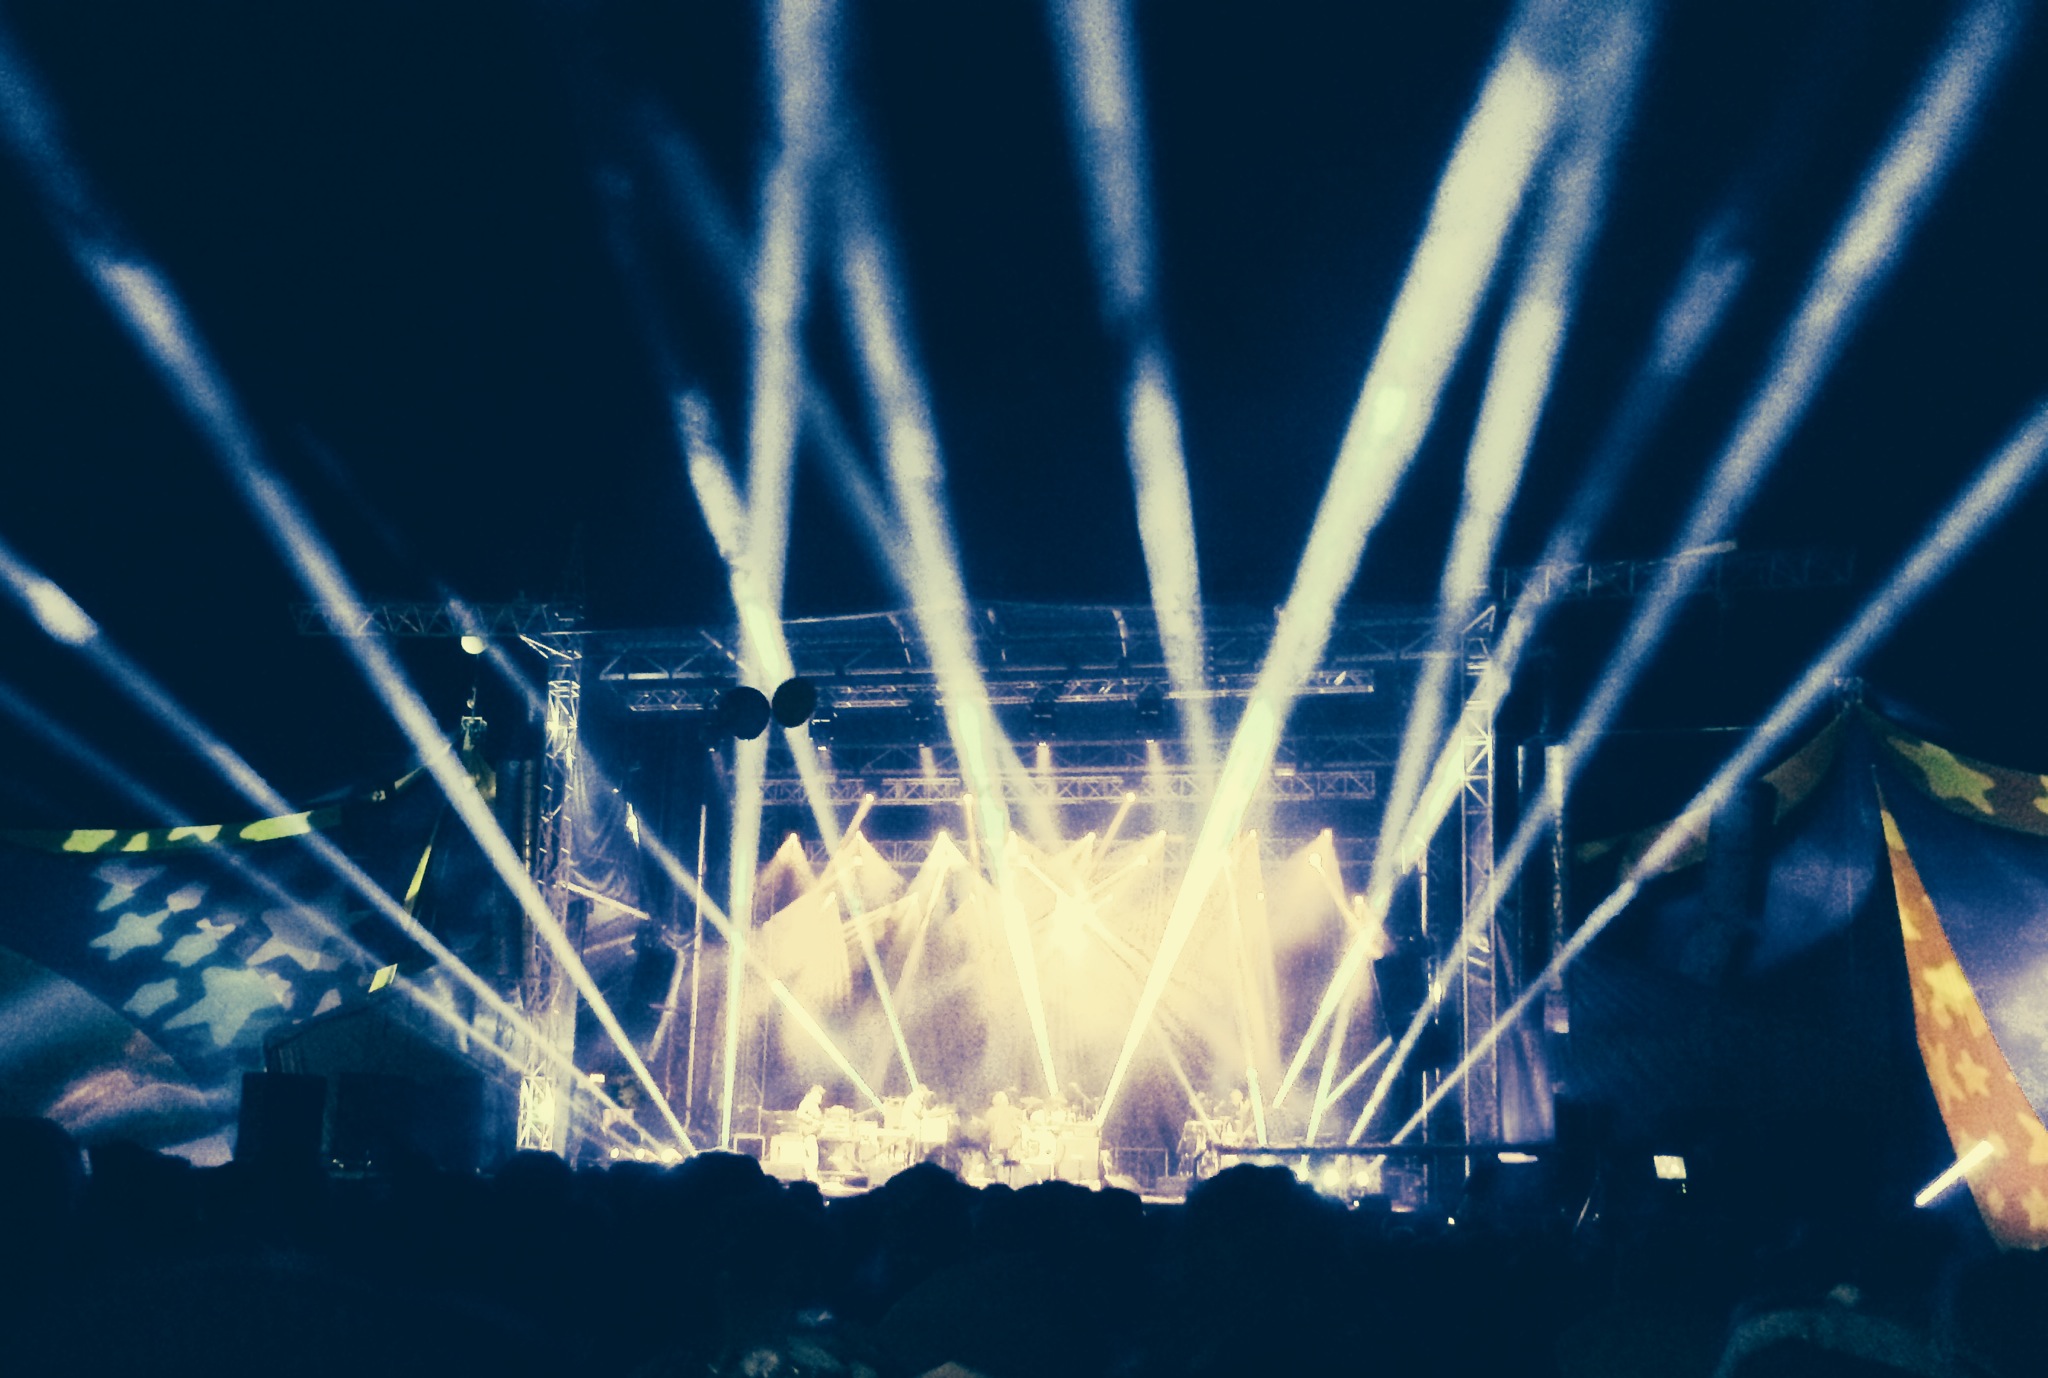 Setlist / Photos: Widespread Panic @ Phases Of The Moon Festival 9/13/14